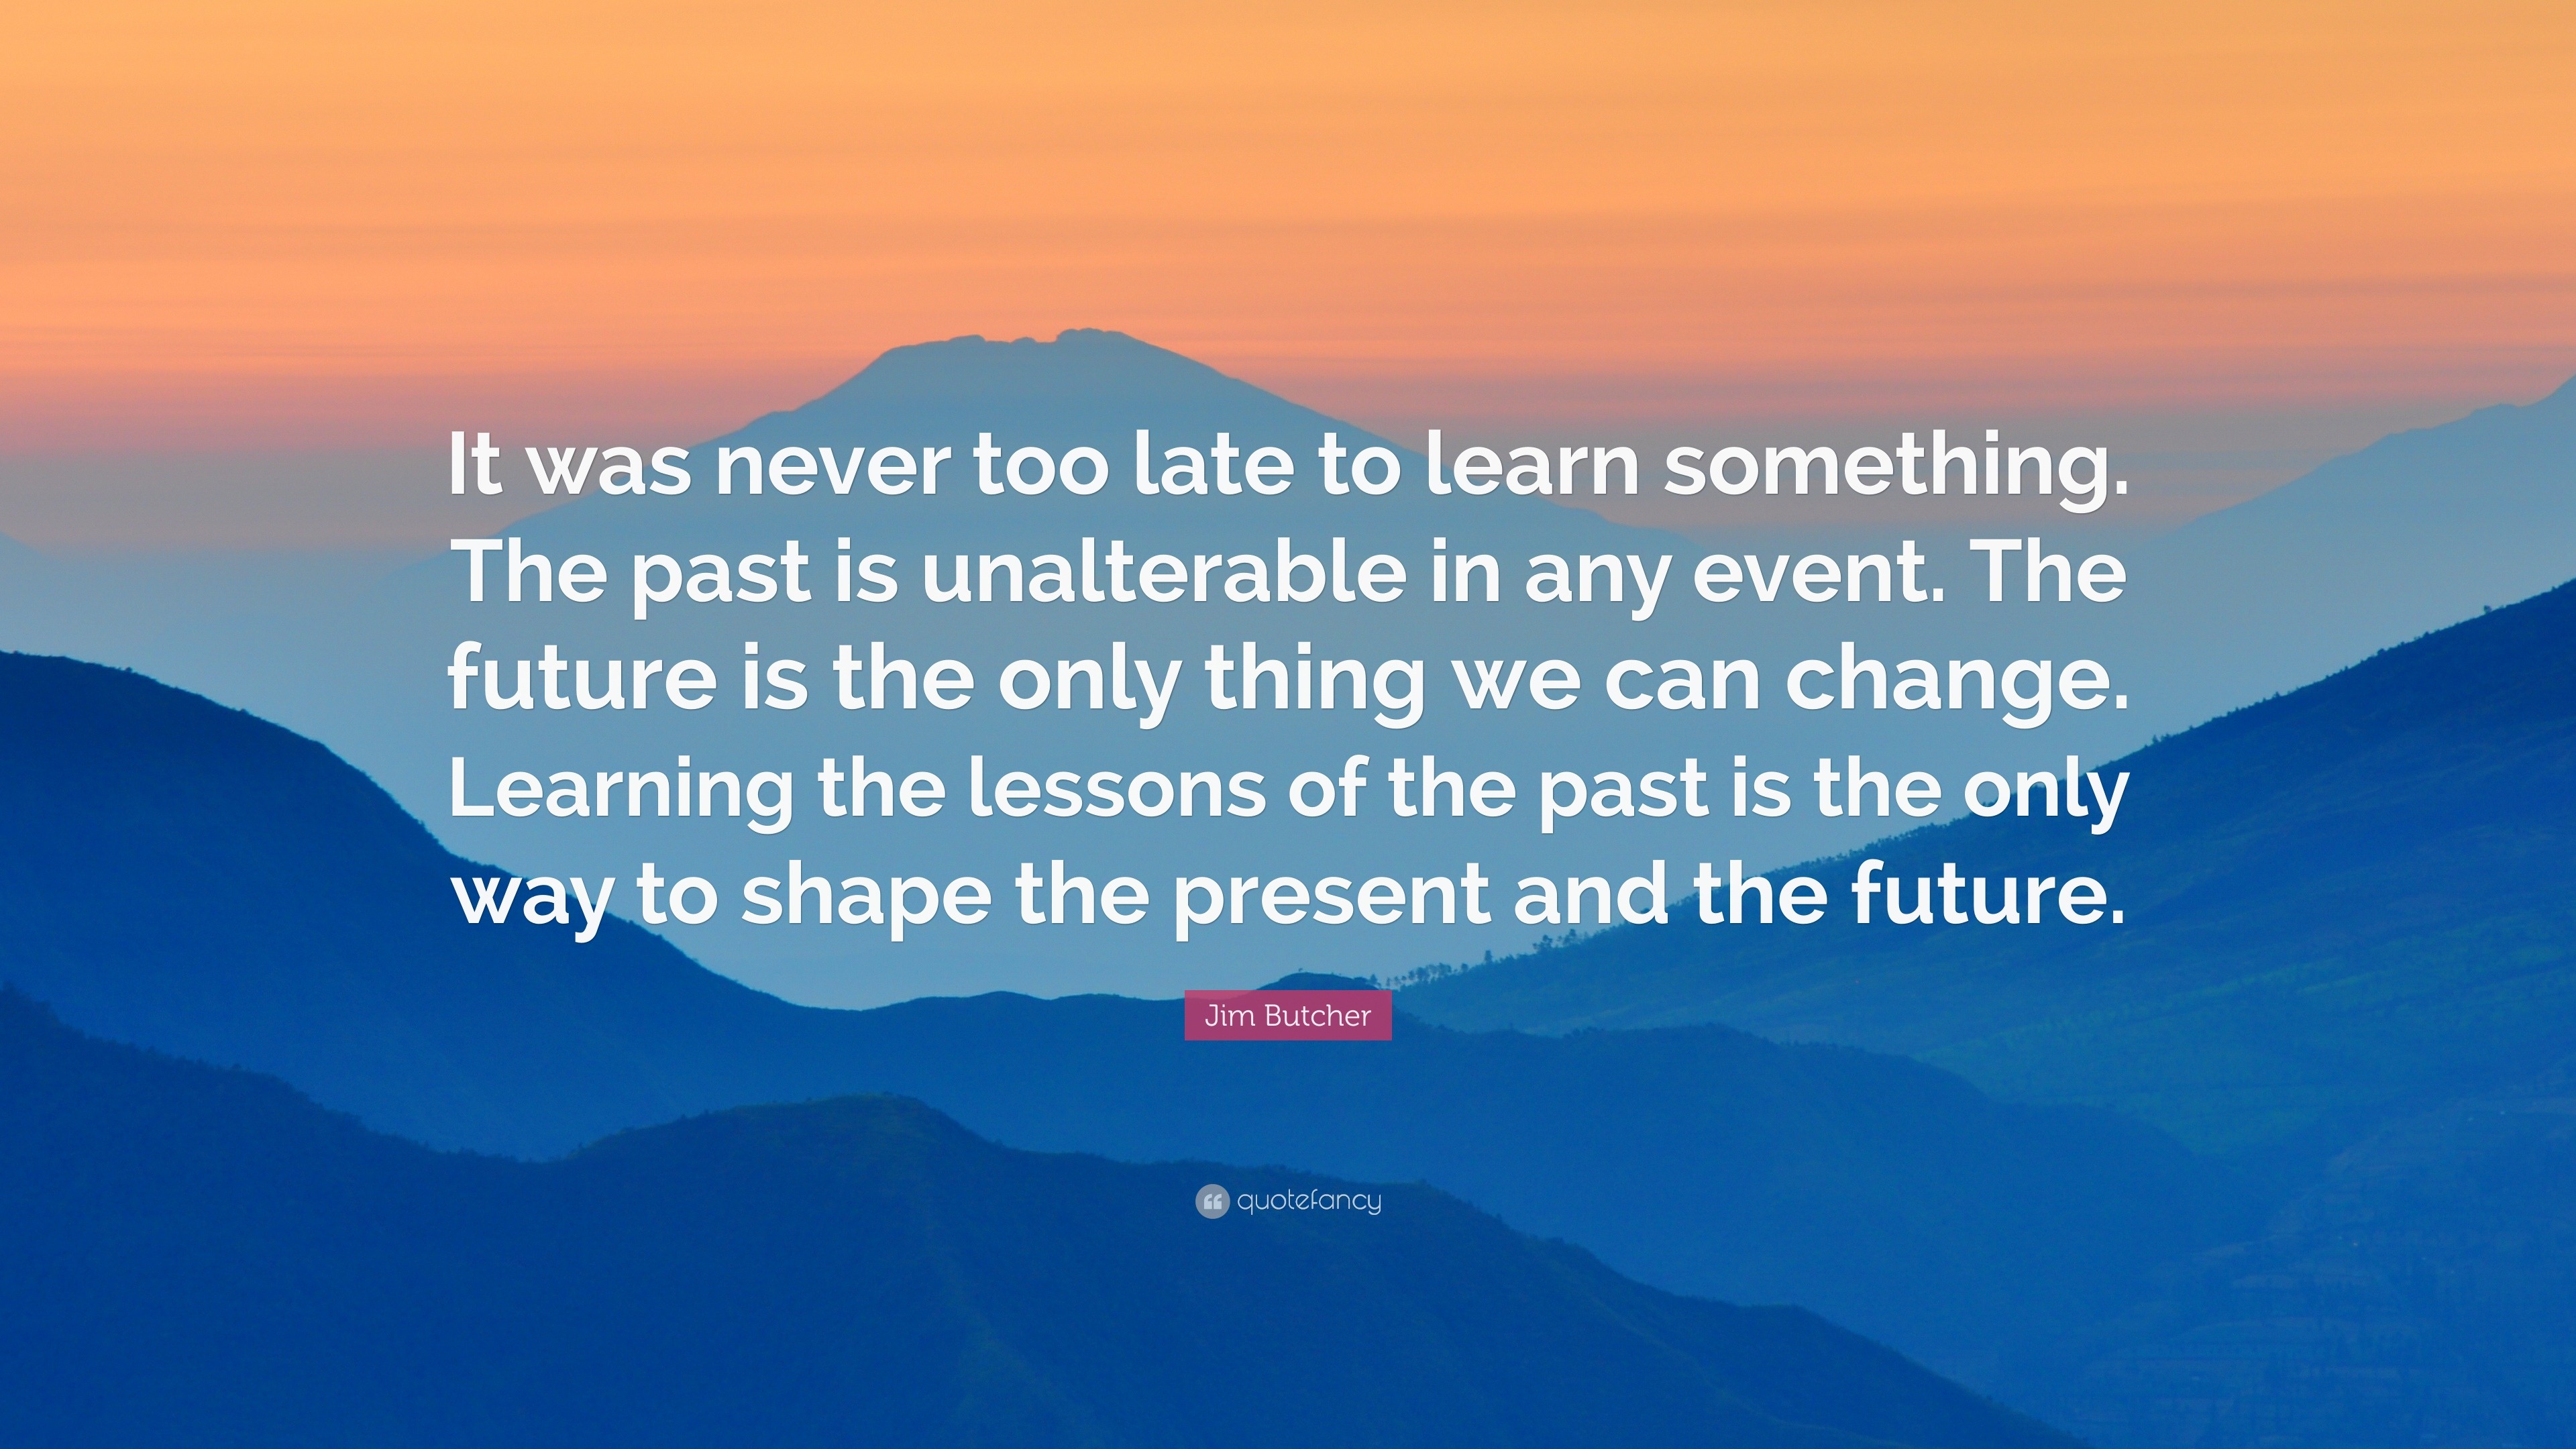 Jim Butcher Quote: “It was never too late to learn something. The past is  unalterable in any event. The future is the only thing we can chan”